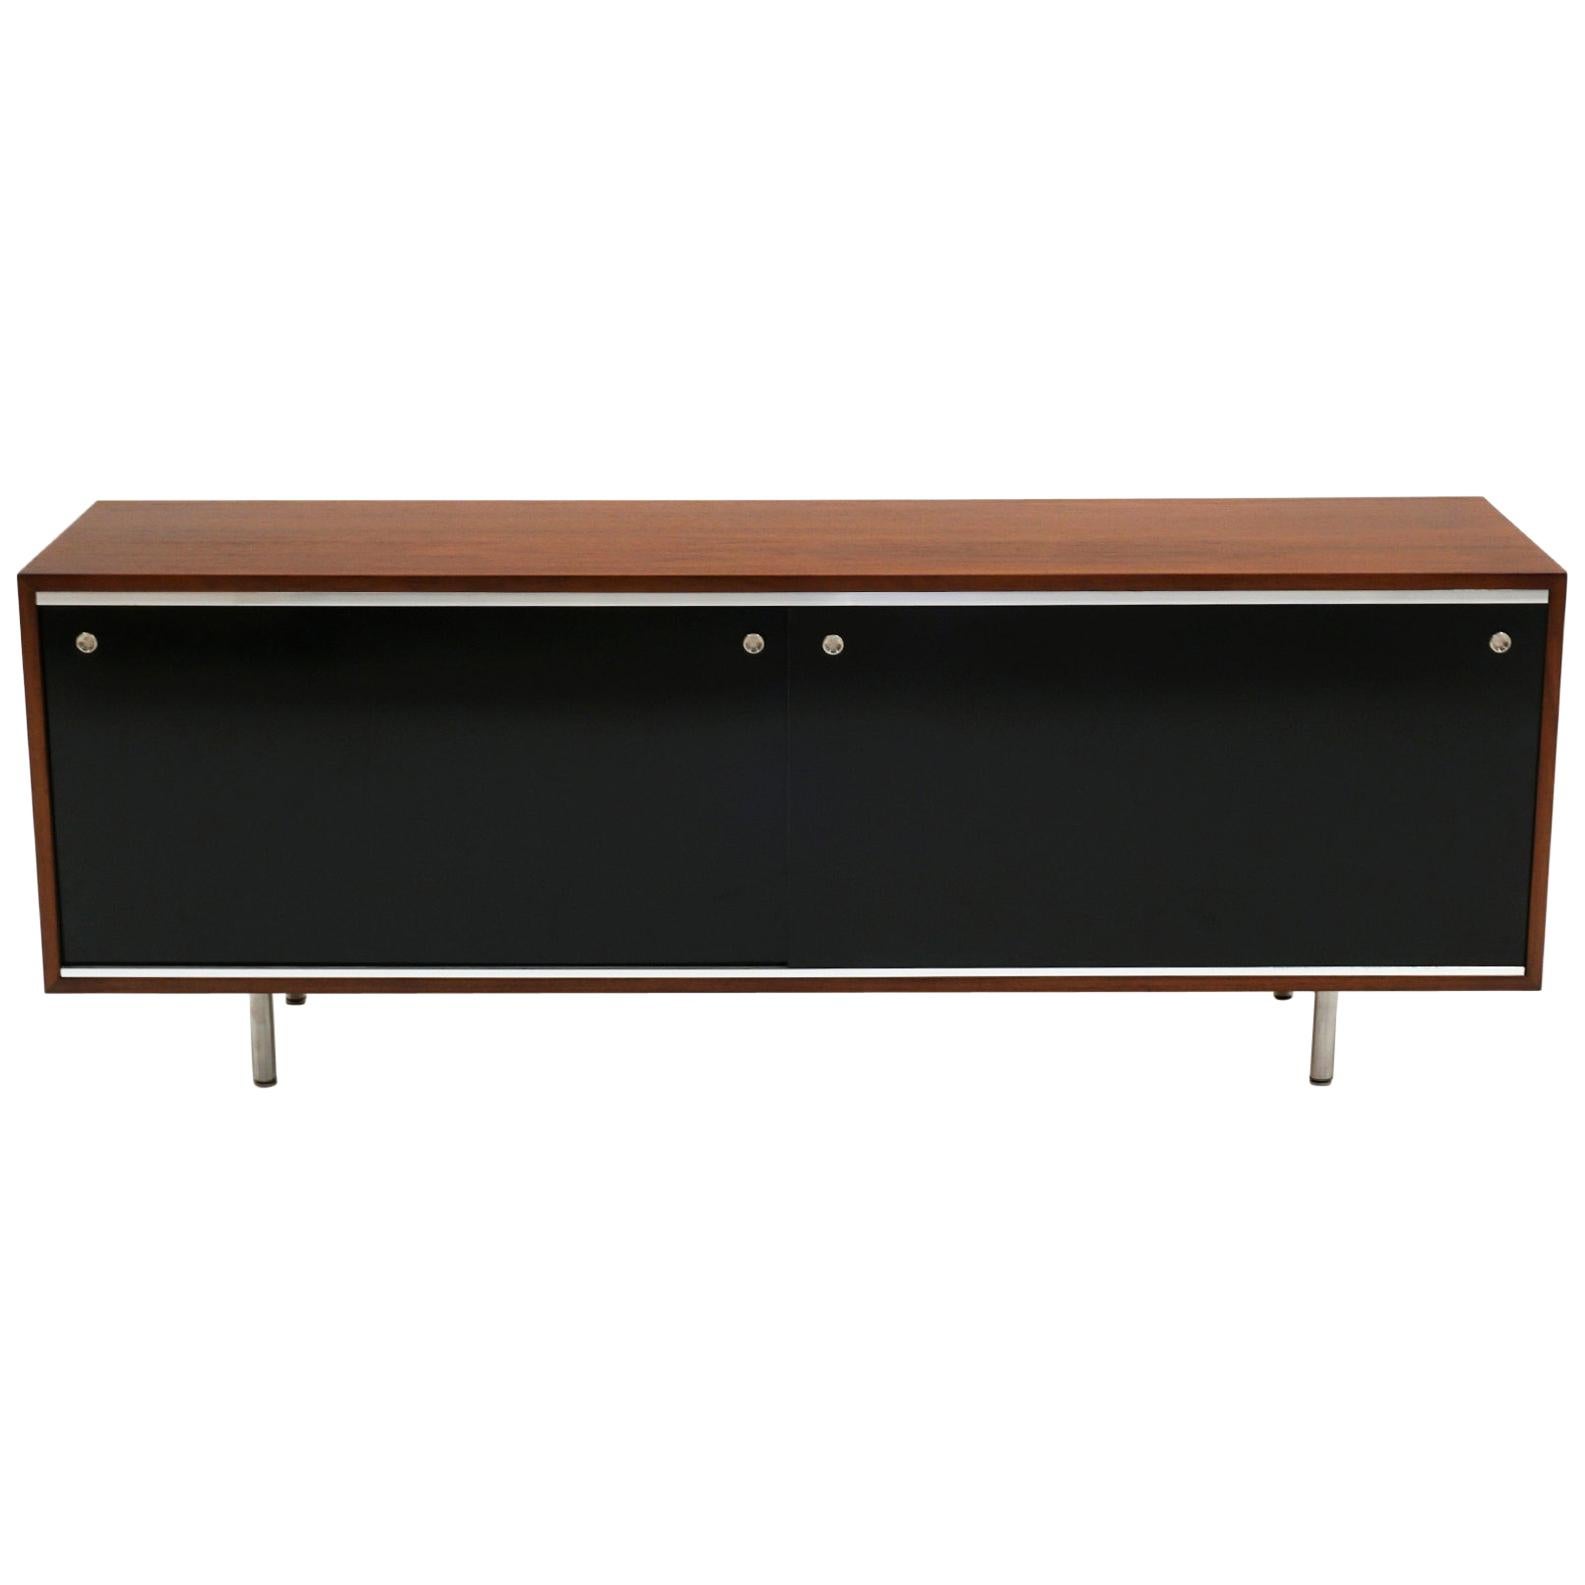 George Nelson Credenza, Expertly Restored, Walnut with Black Sliding Doors